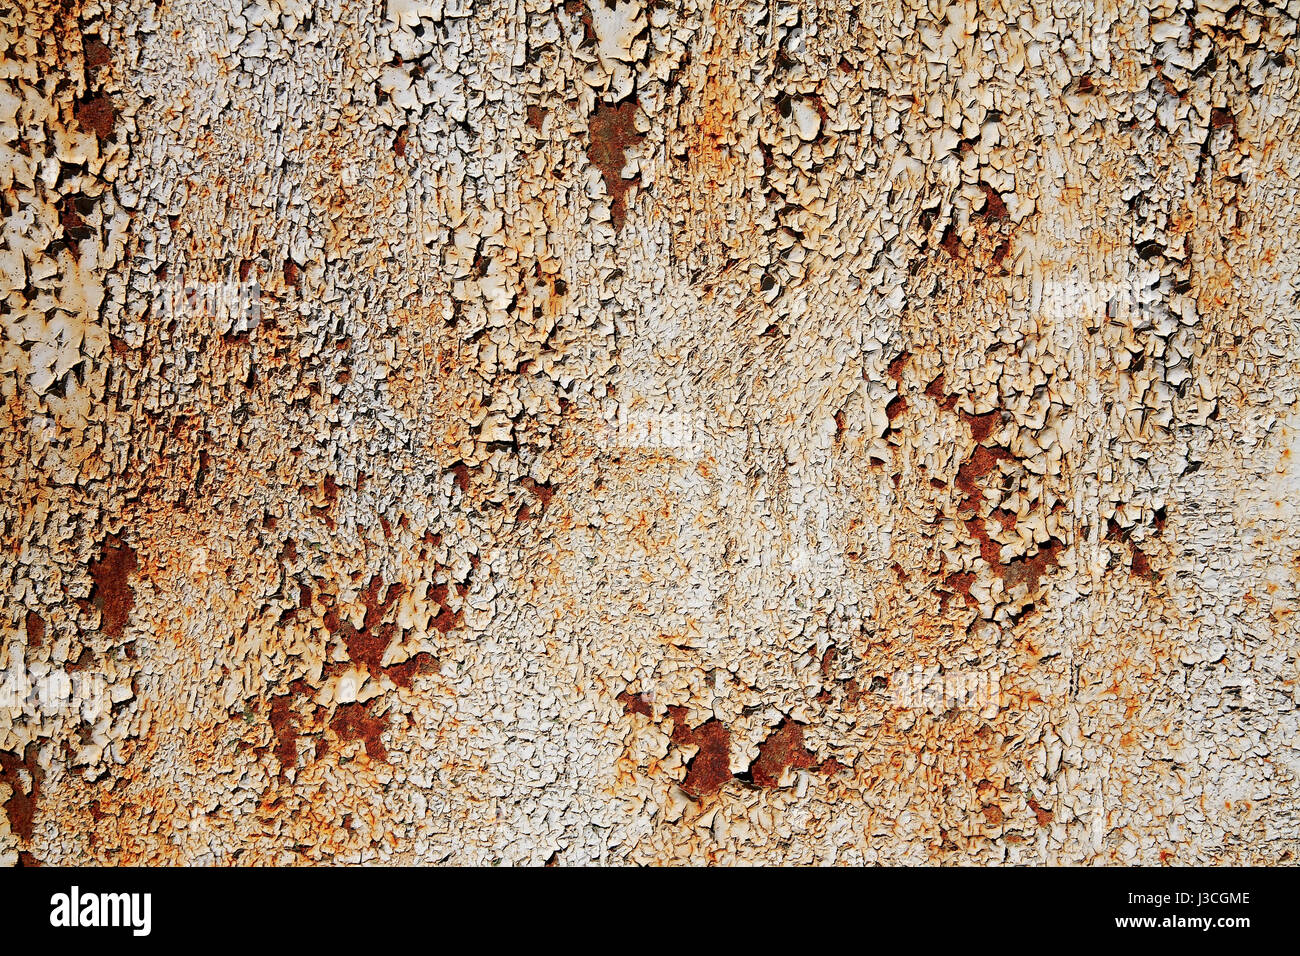 Rusted surface close-up, corrosion of metal Stock Photo